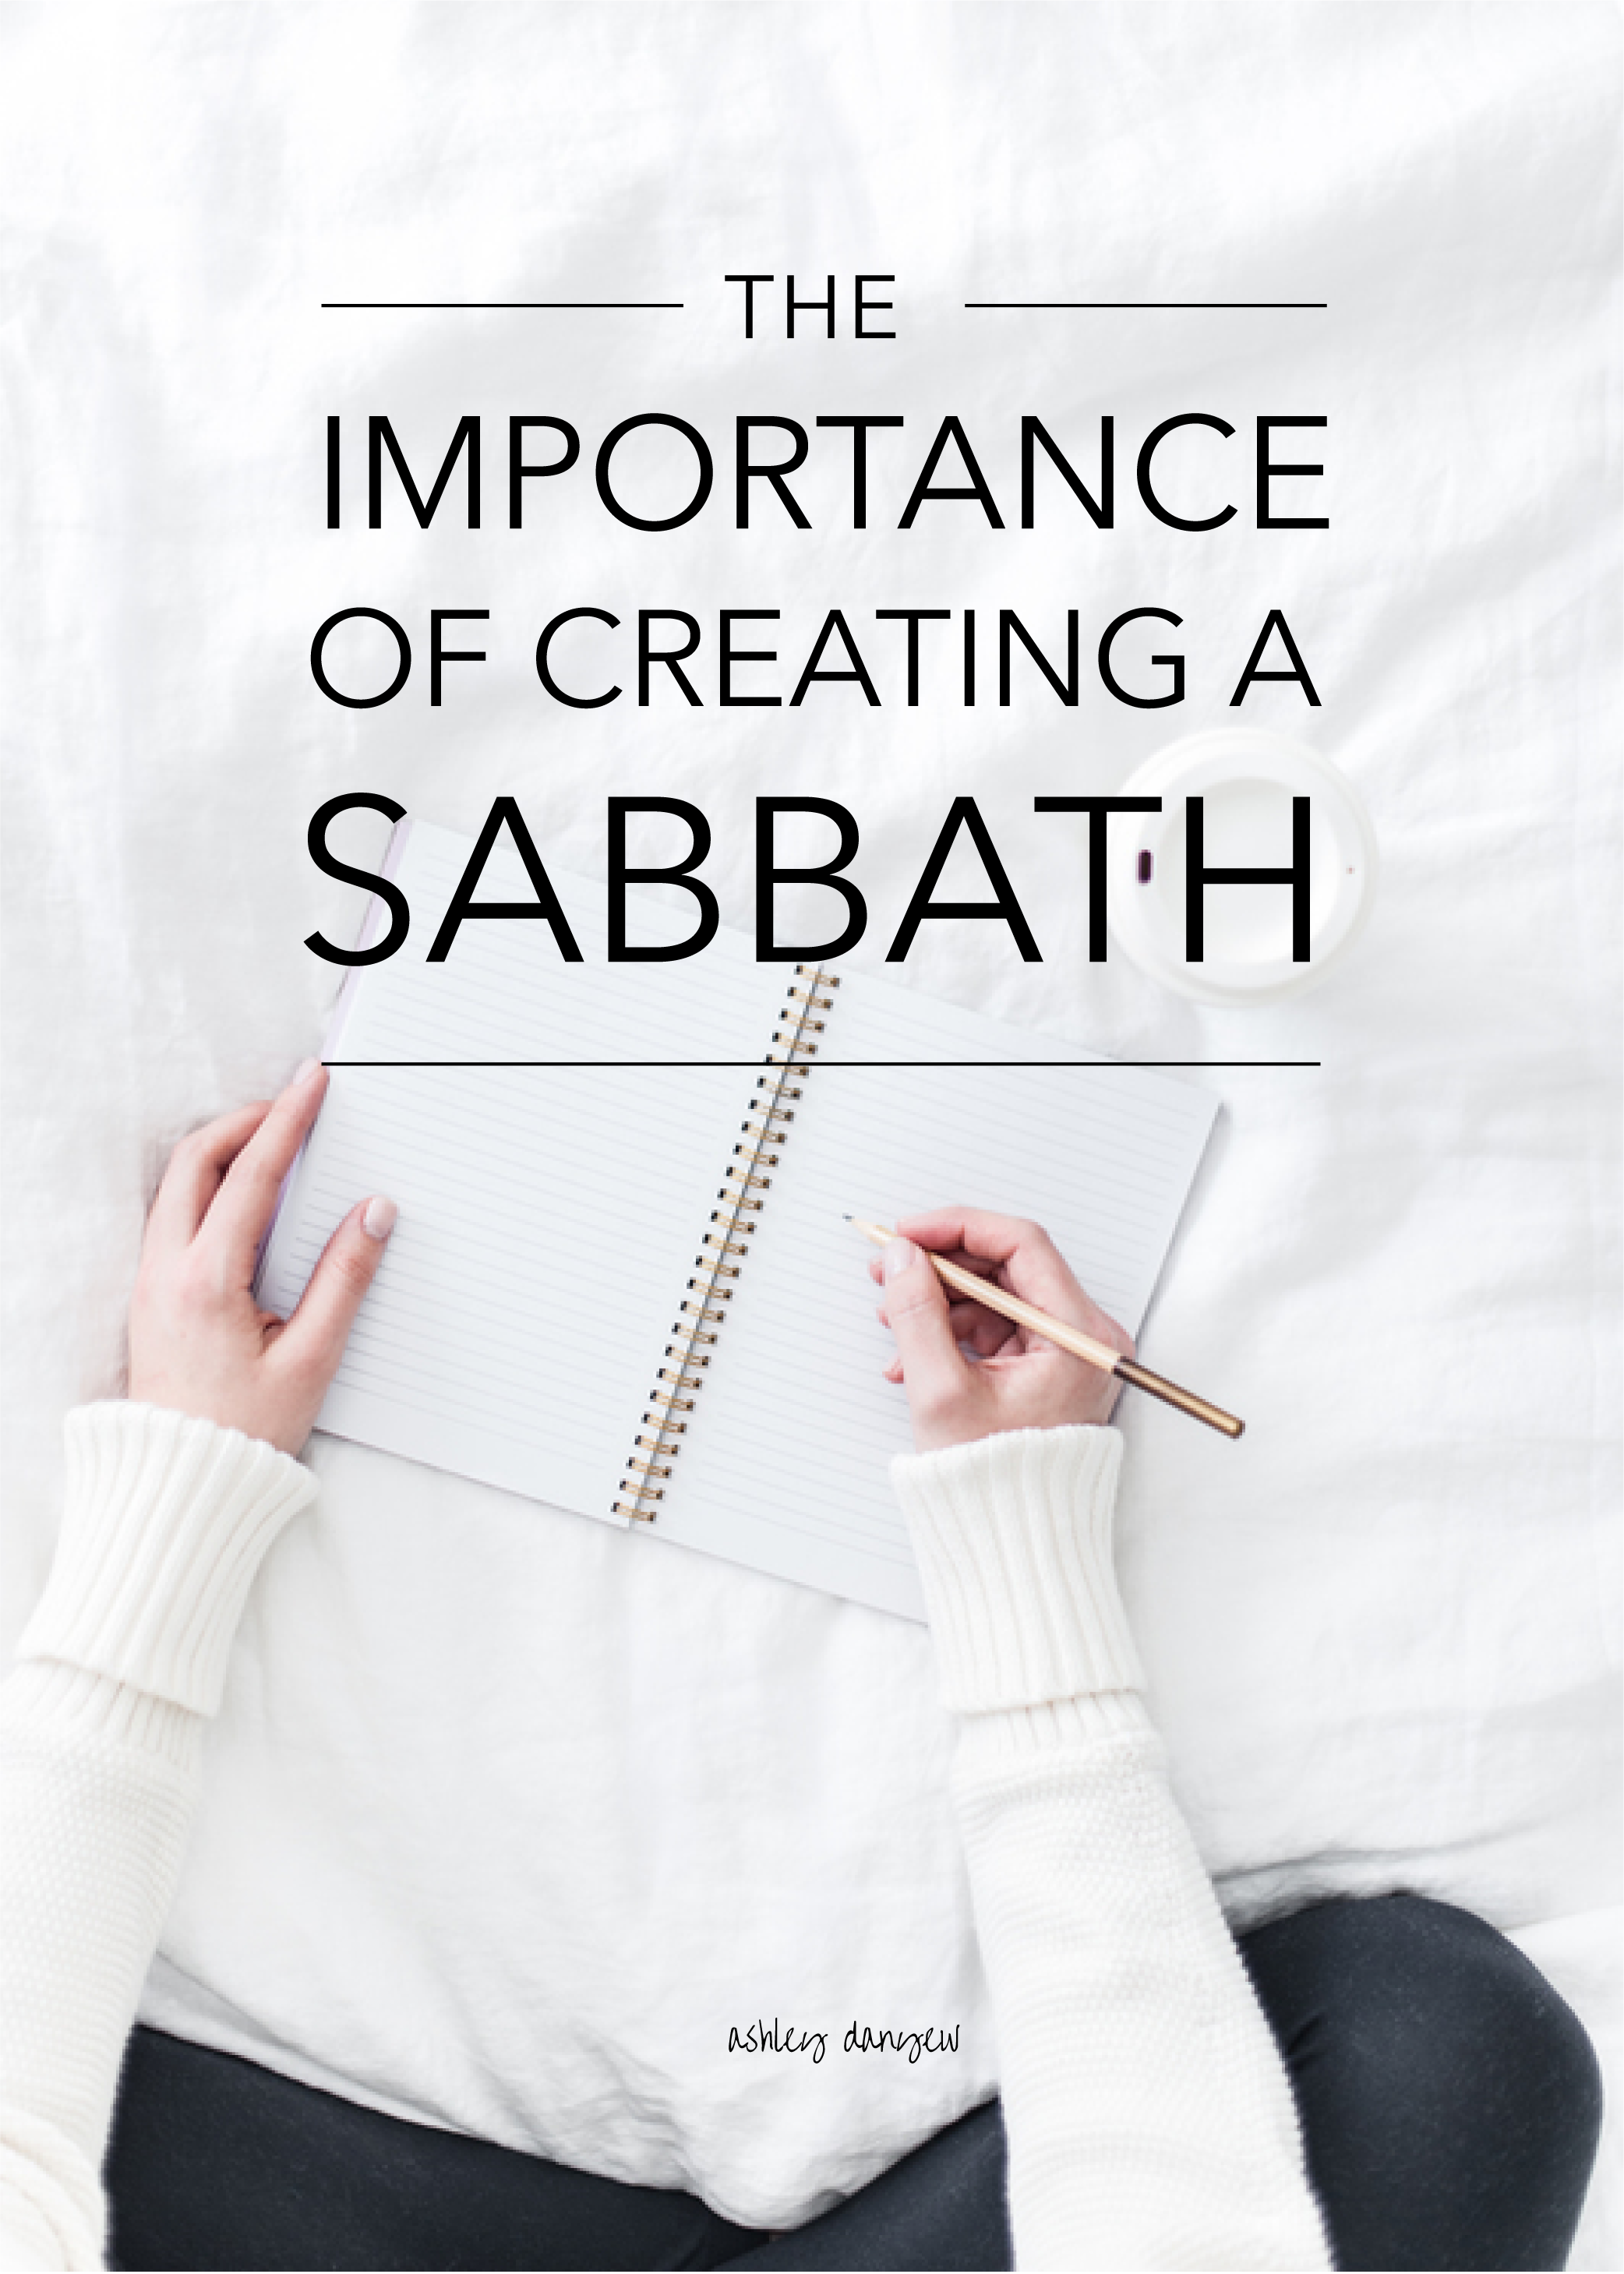 Copy of The Importance of Creating a Sabbath